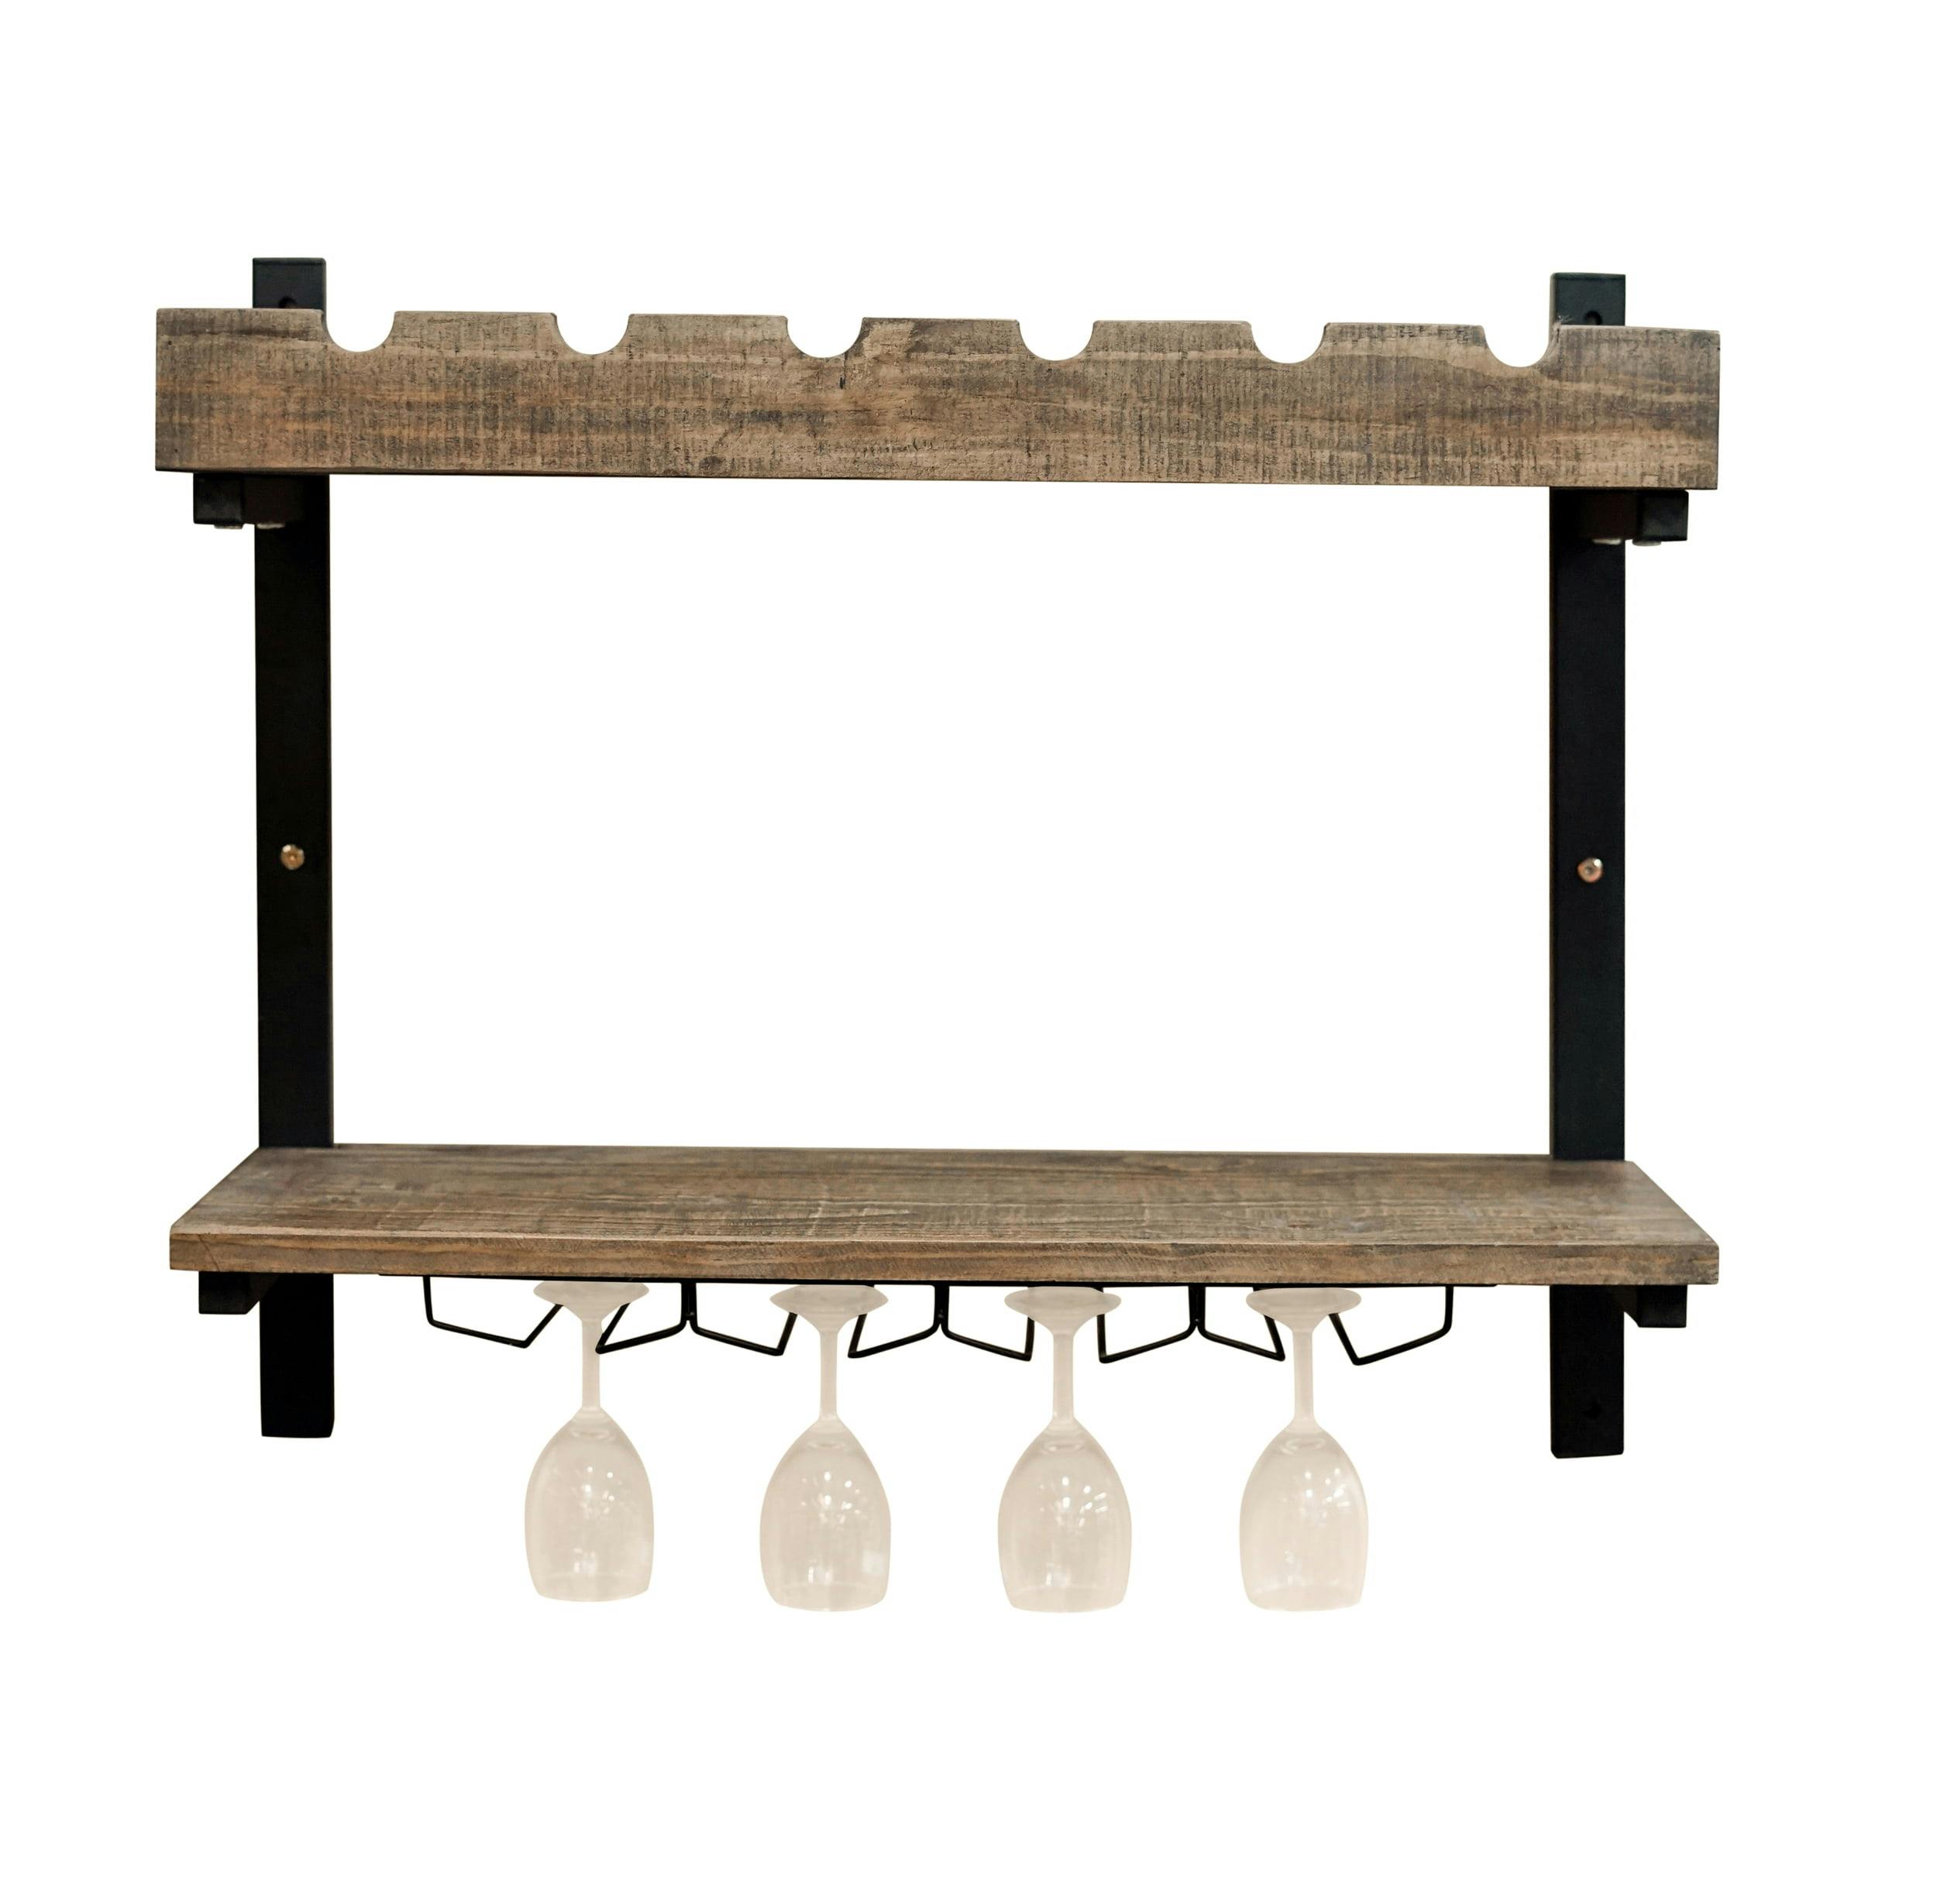 Pomona Rustic Industrial Wall-Mounted Wine Rack with Glass Storage - Brown